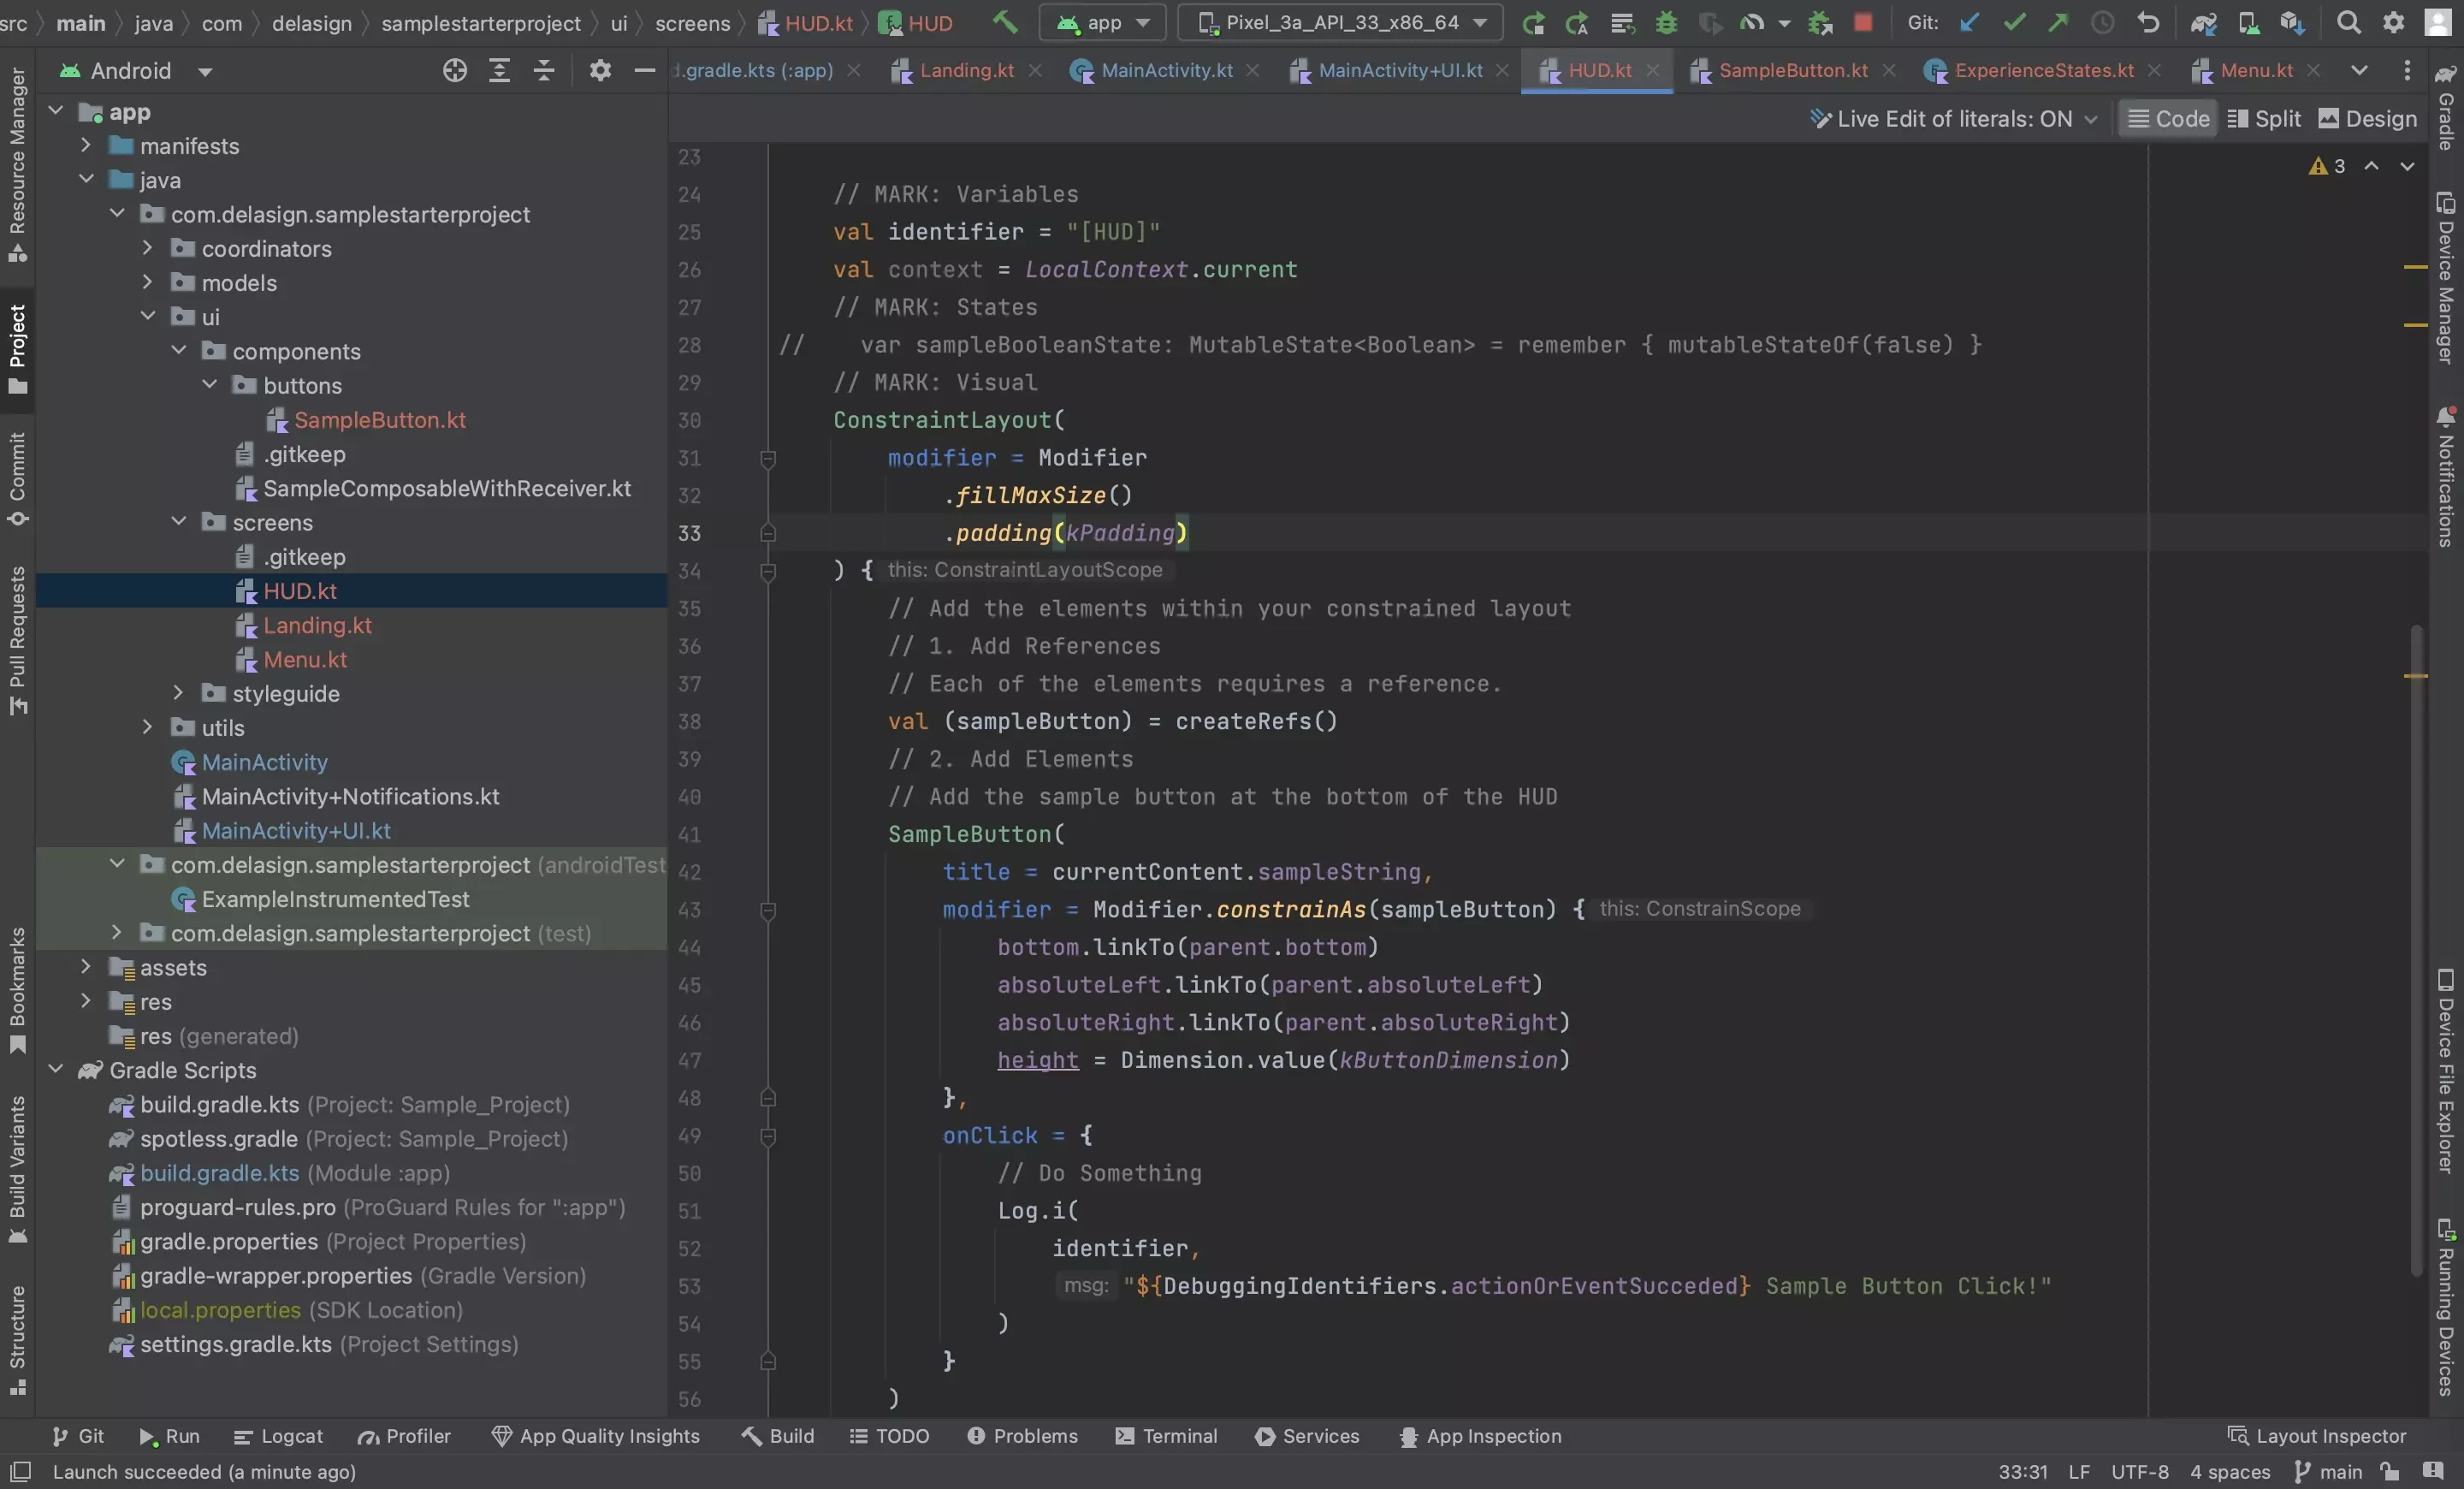 A screenshot of Android Studio showing how to add the custom button to the UI.